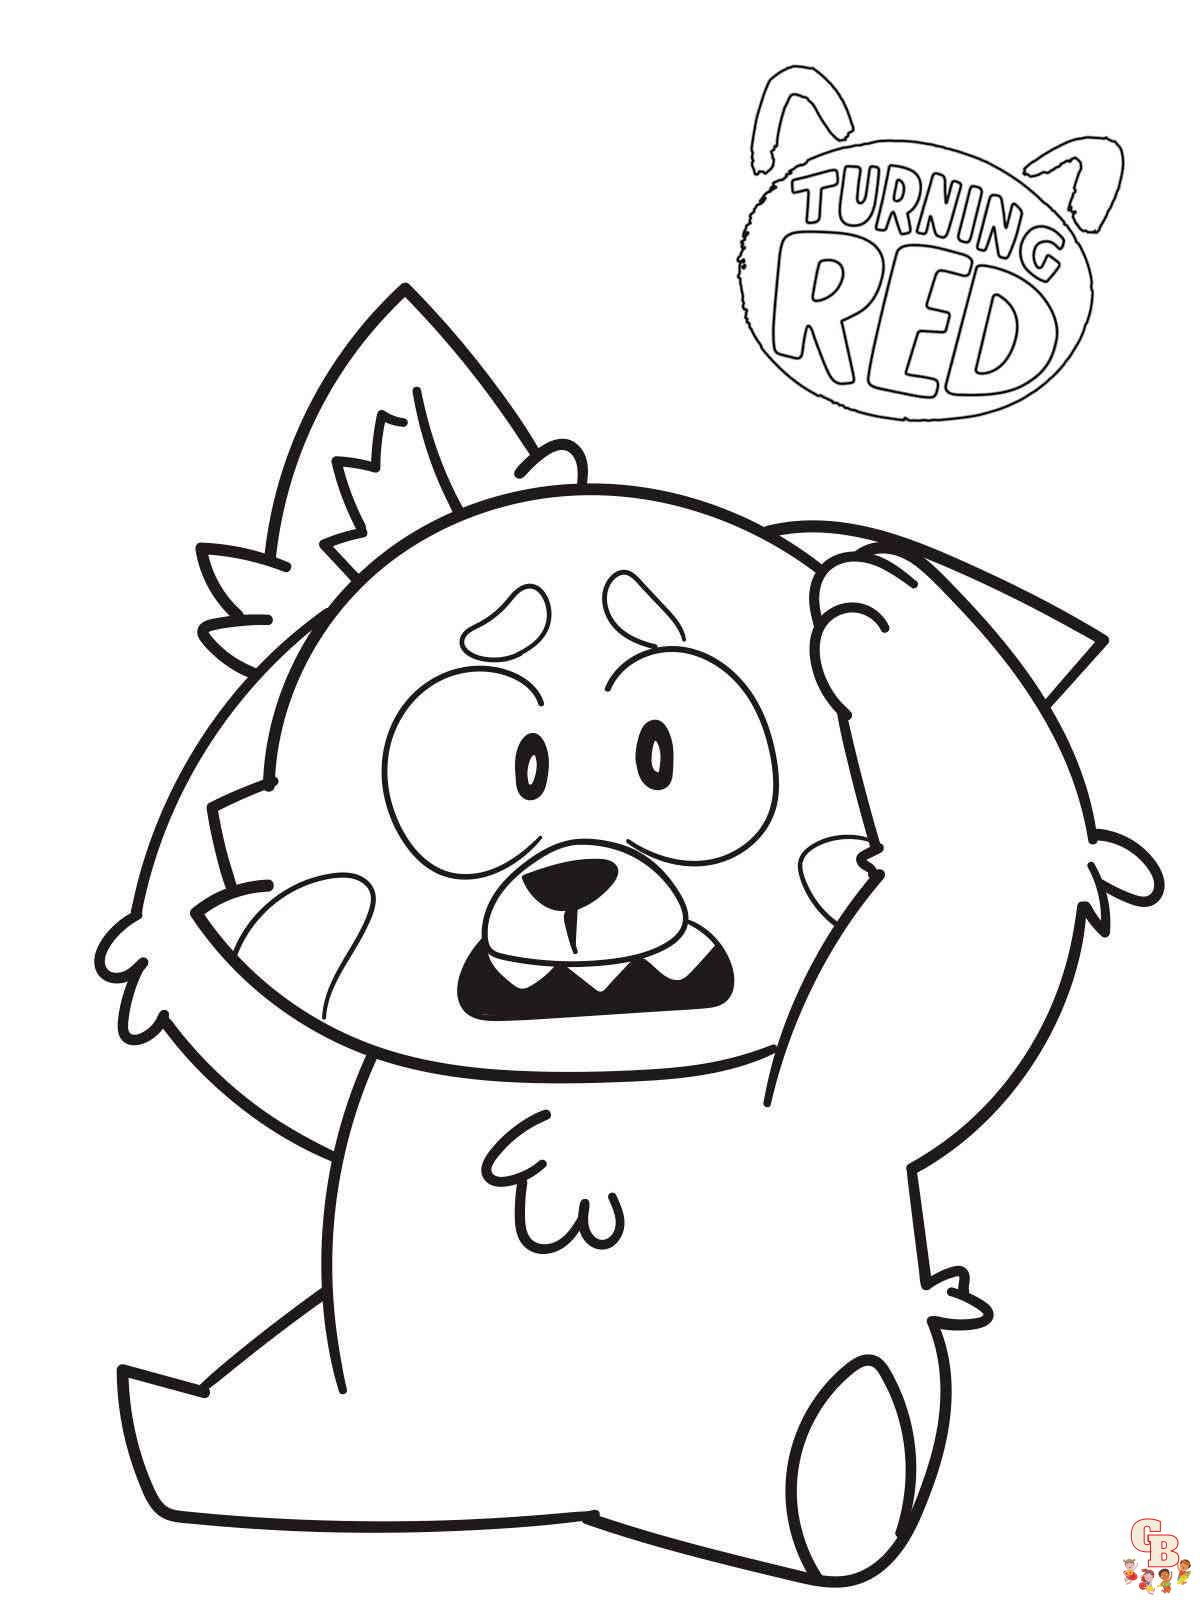 Fun and easy turning red coloring pages to print